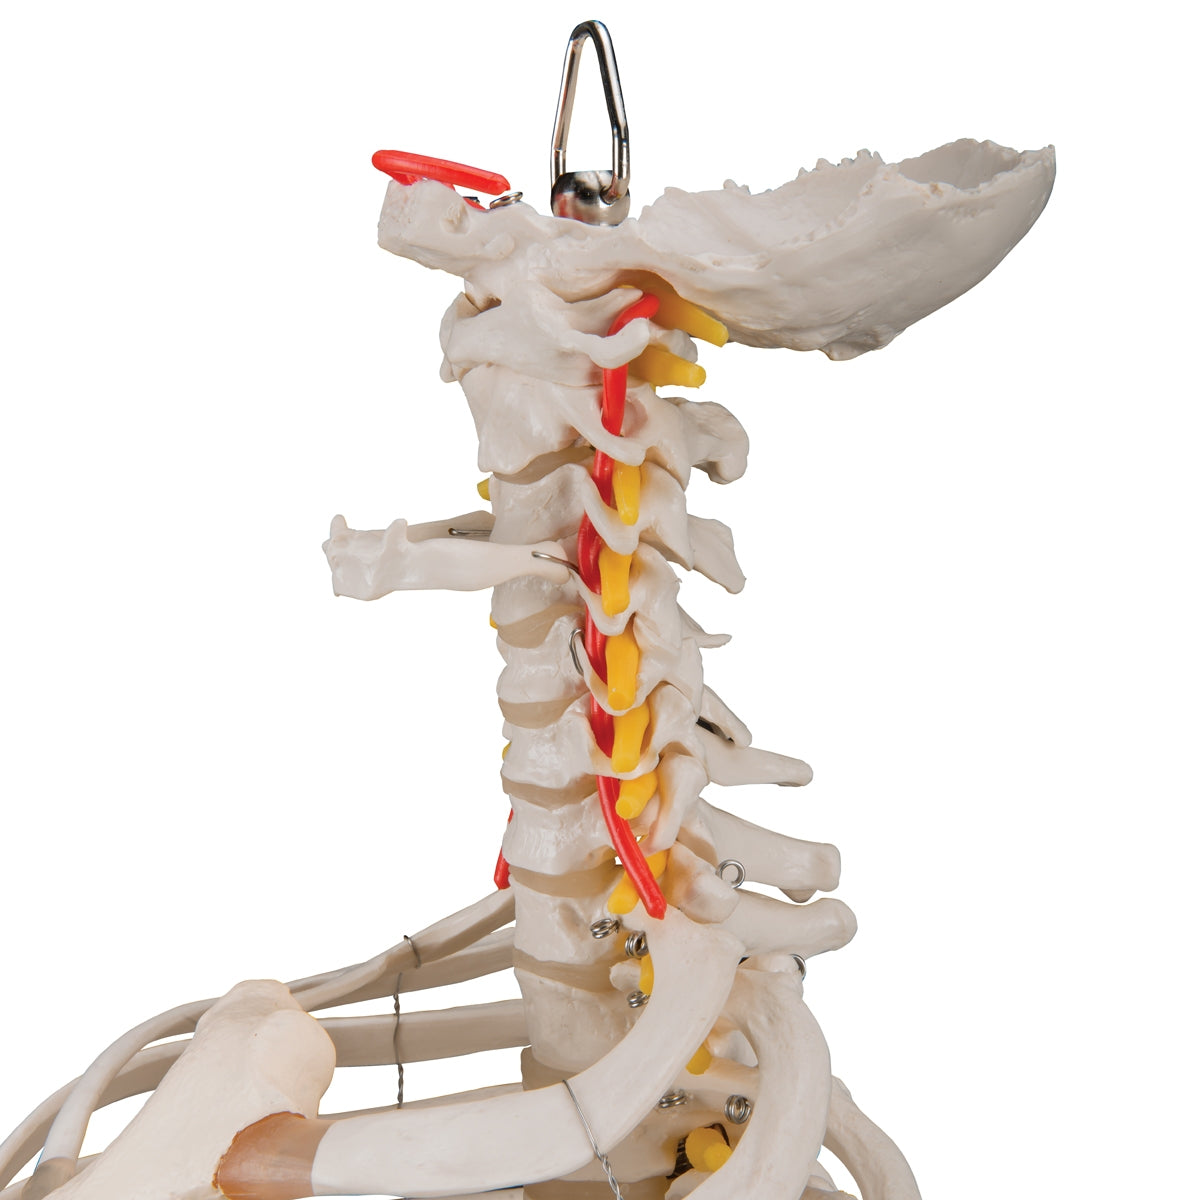 Classic Flexible Human Spine Model with Ribs & Femur Heads